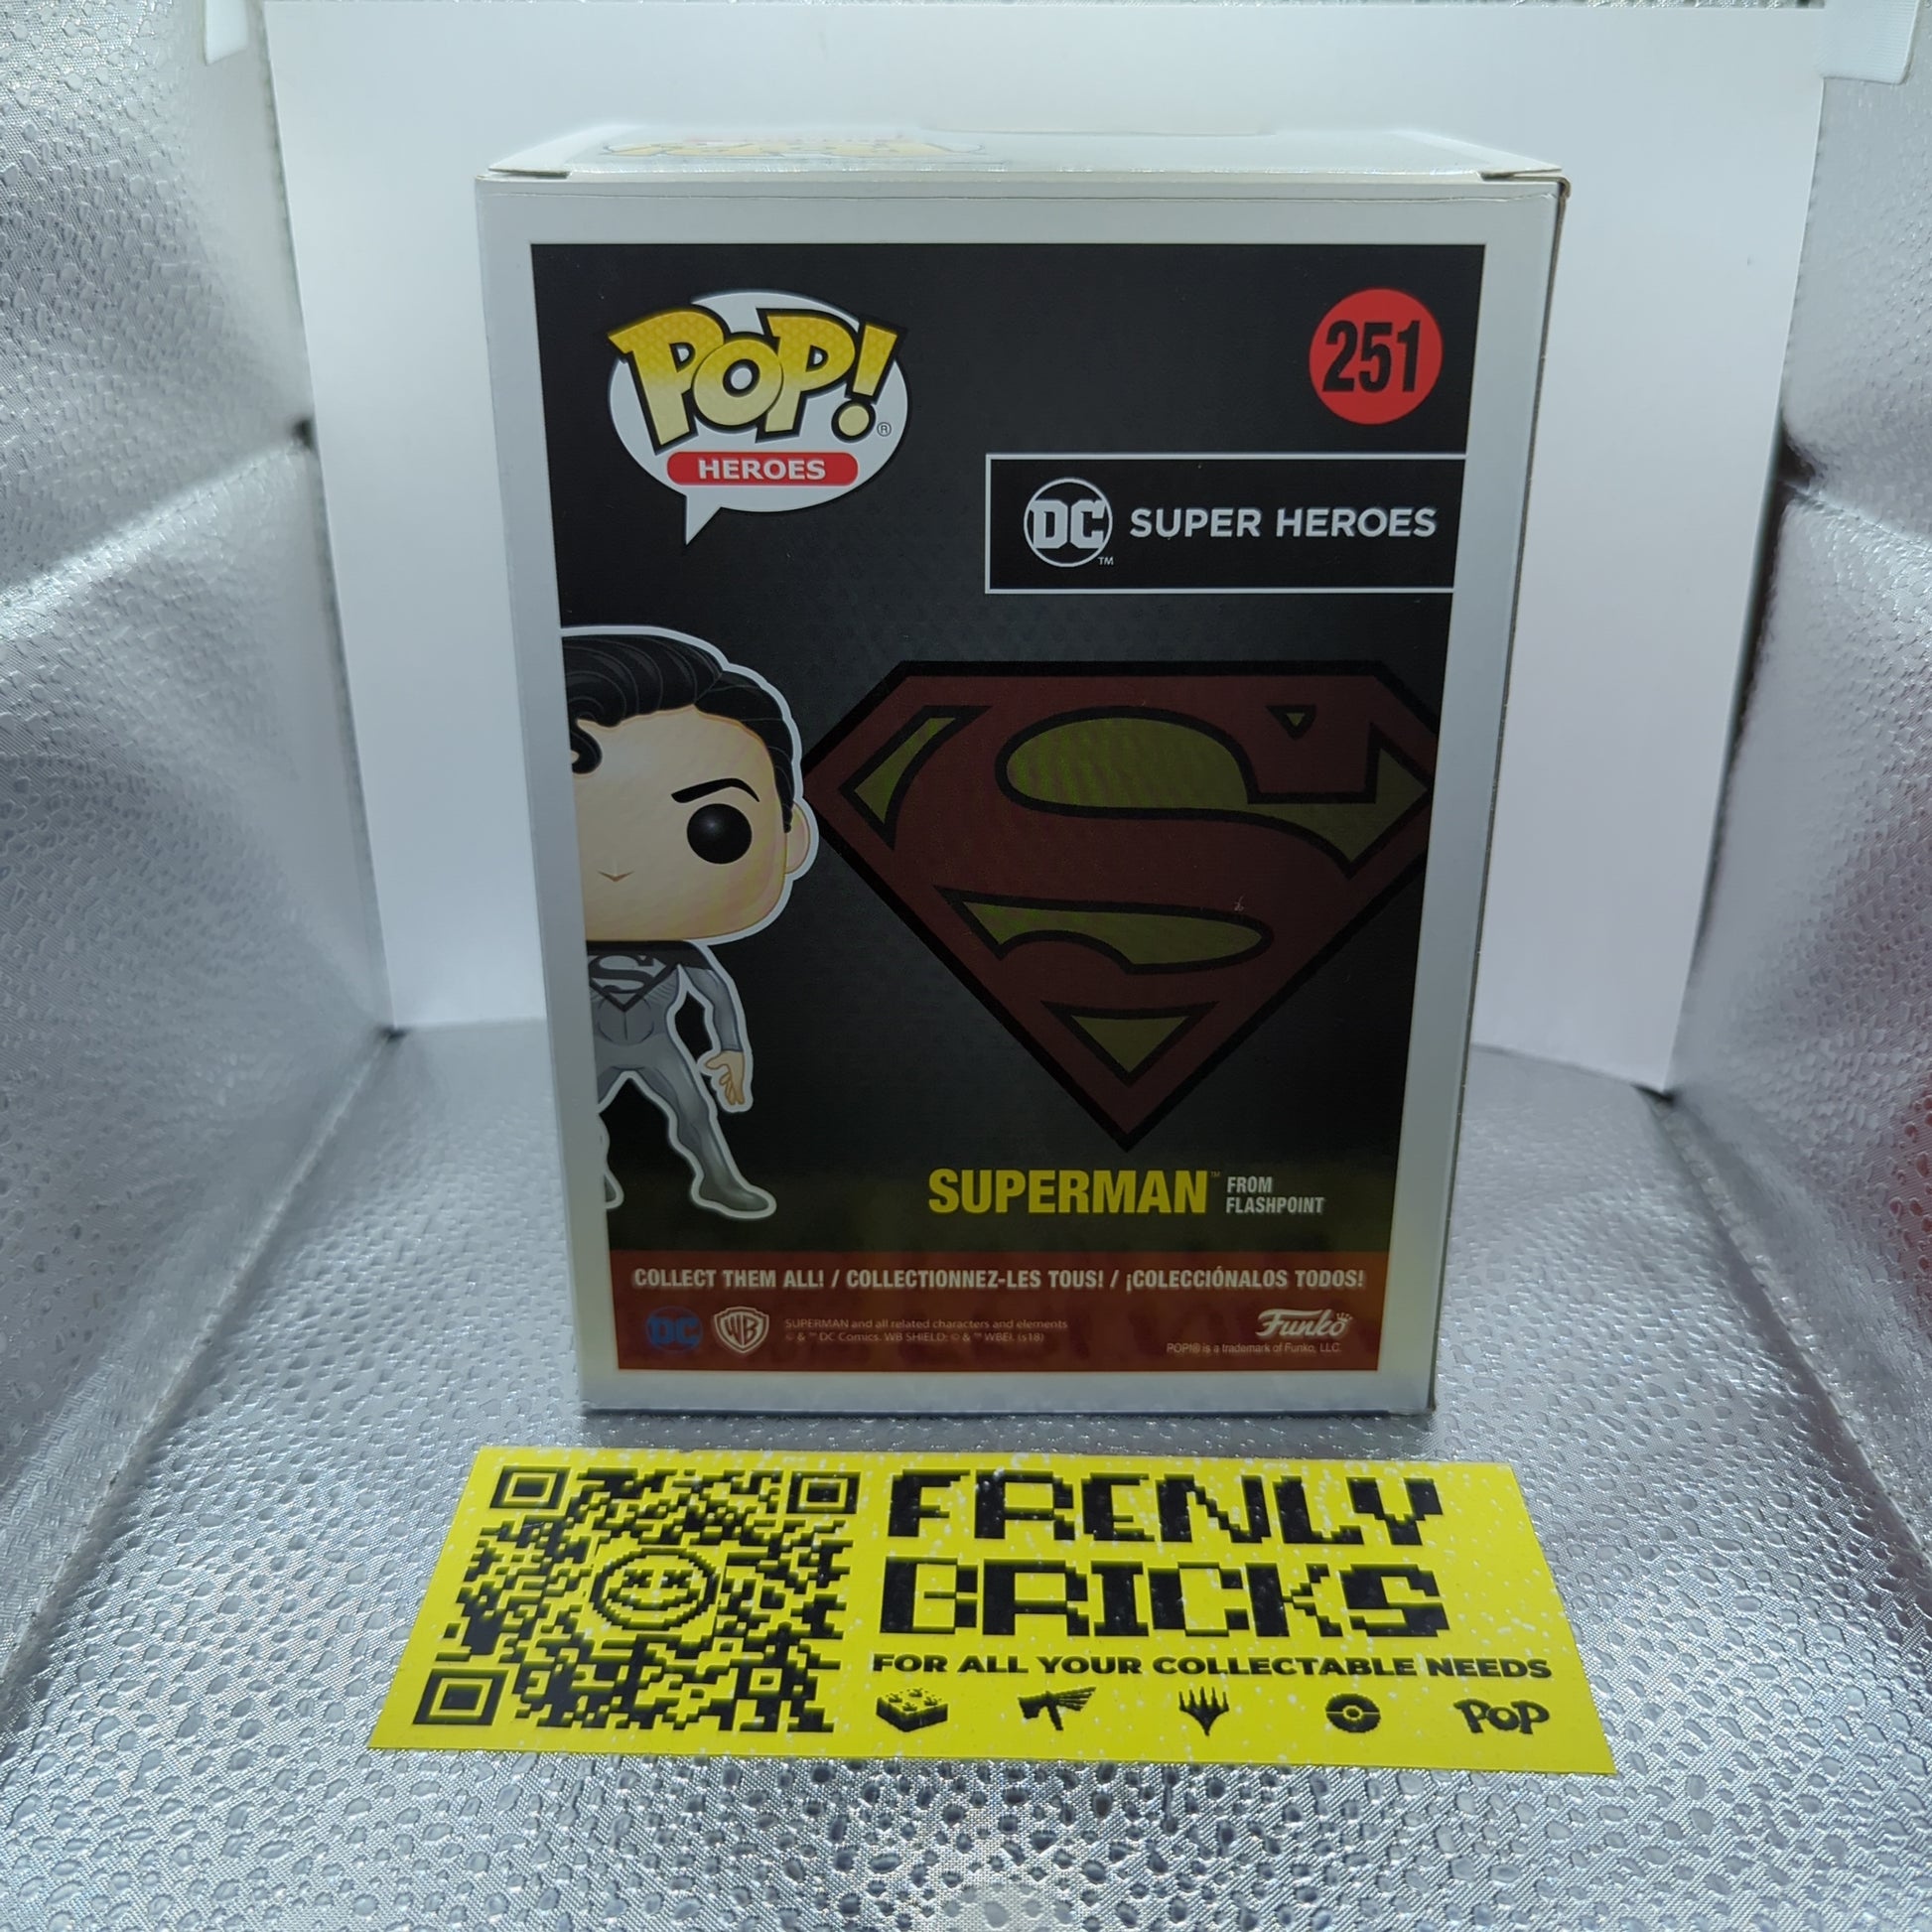 Funko Pop Superman From Flashpoint 251 DC Super Heroes Vinyl Chase Exclusive FRENLY BRICKS - Open 7 Days